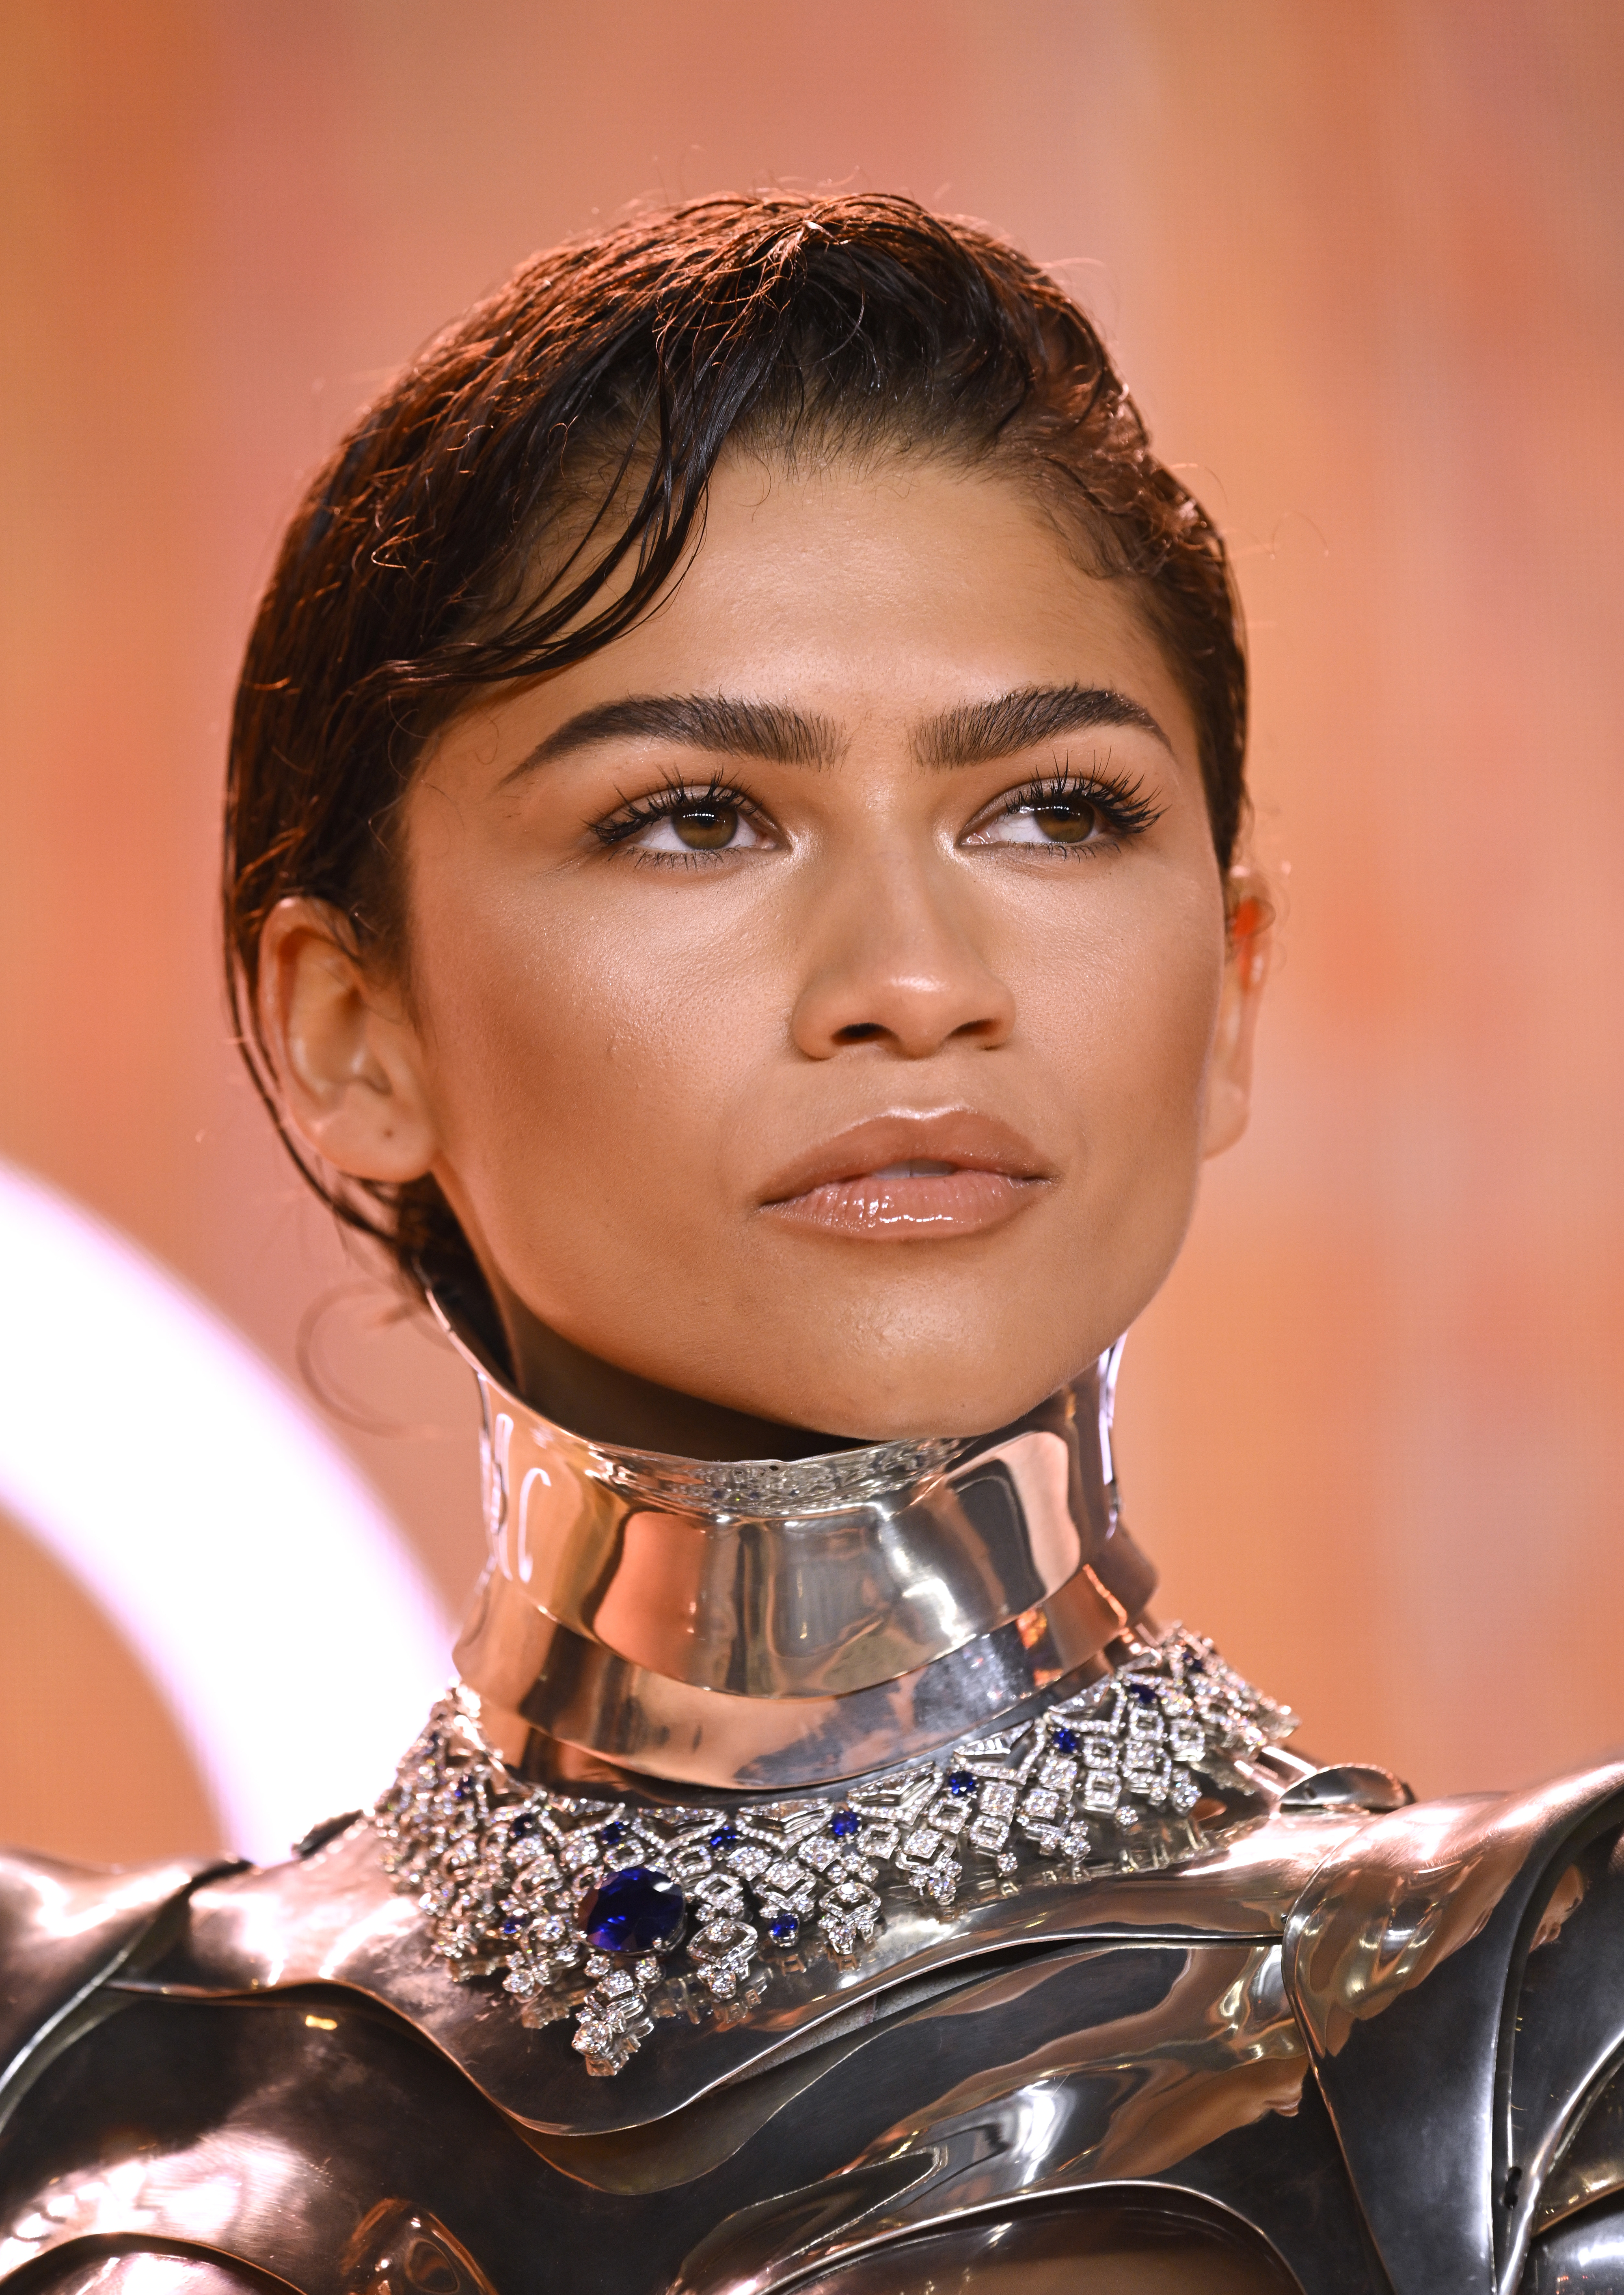 Zendaya wearing a metallic outfit with an ornate collar necklace